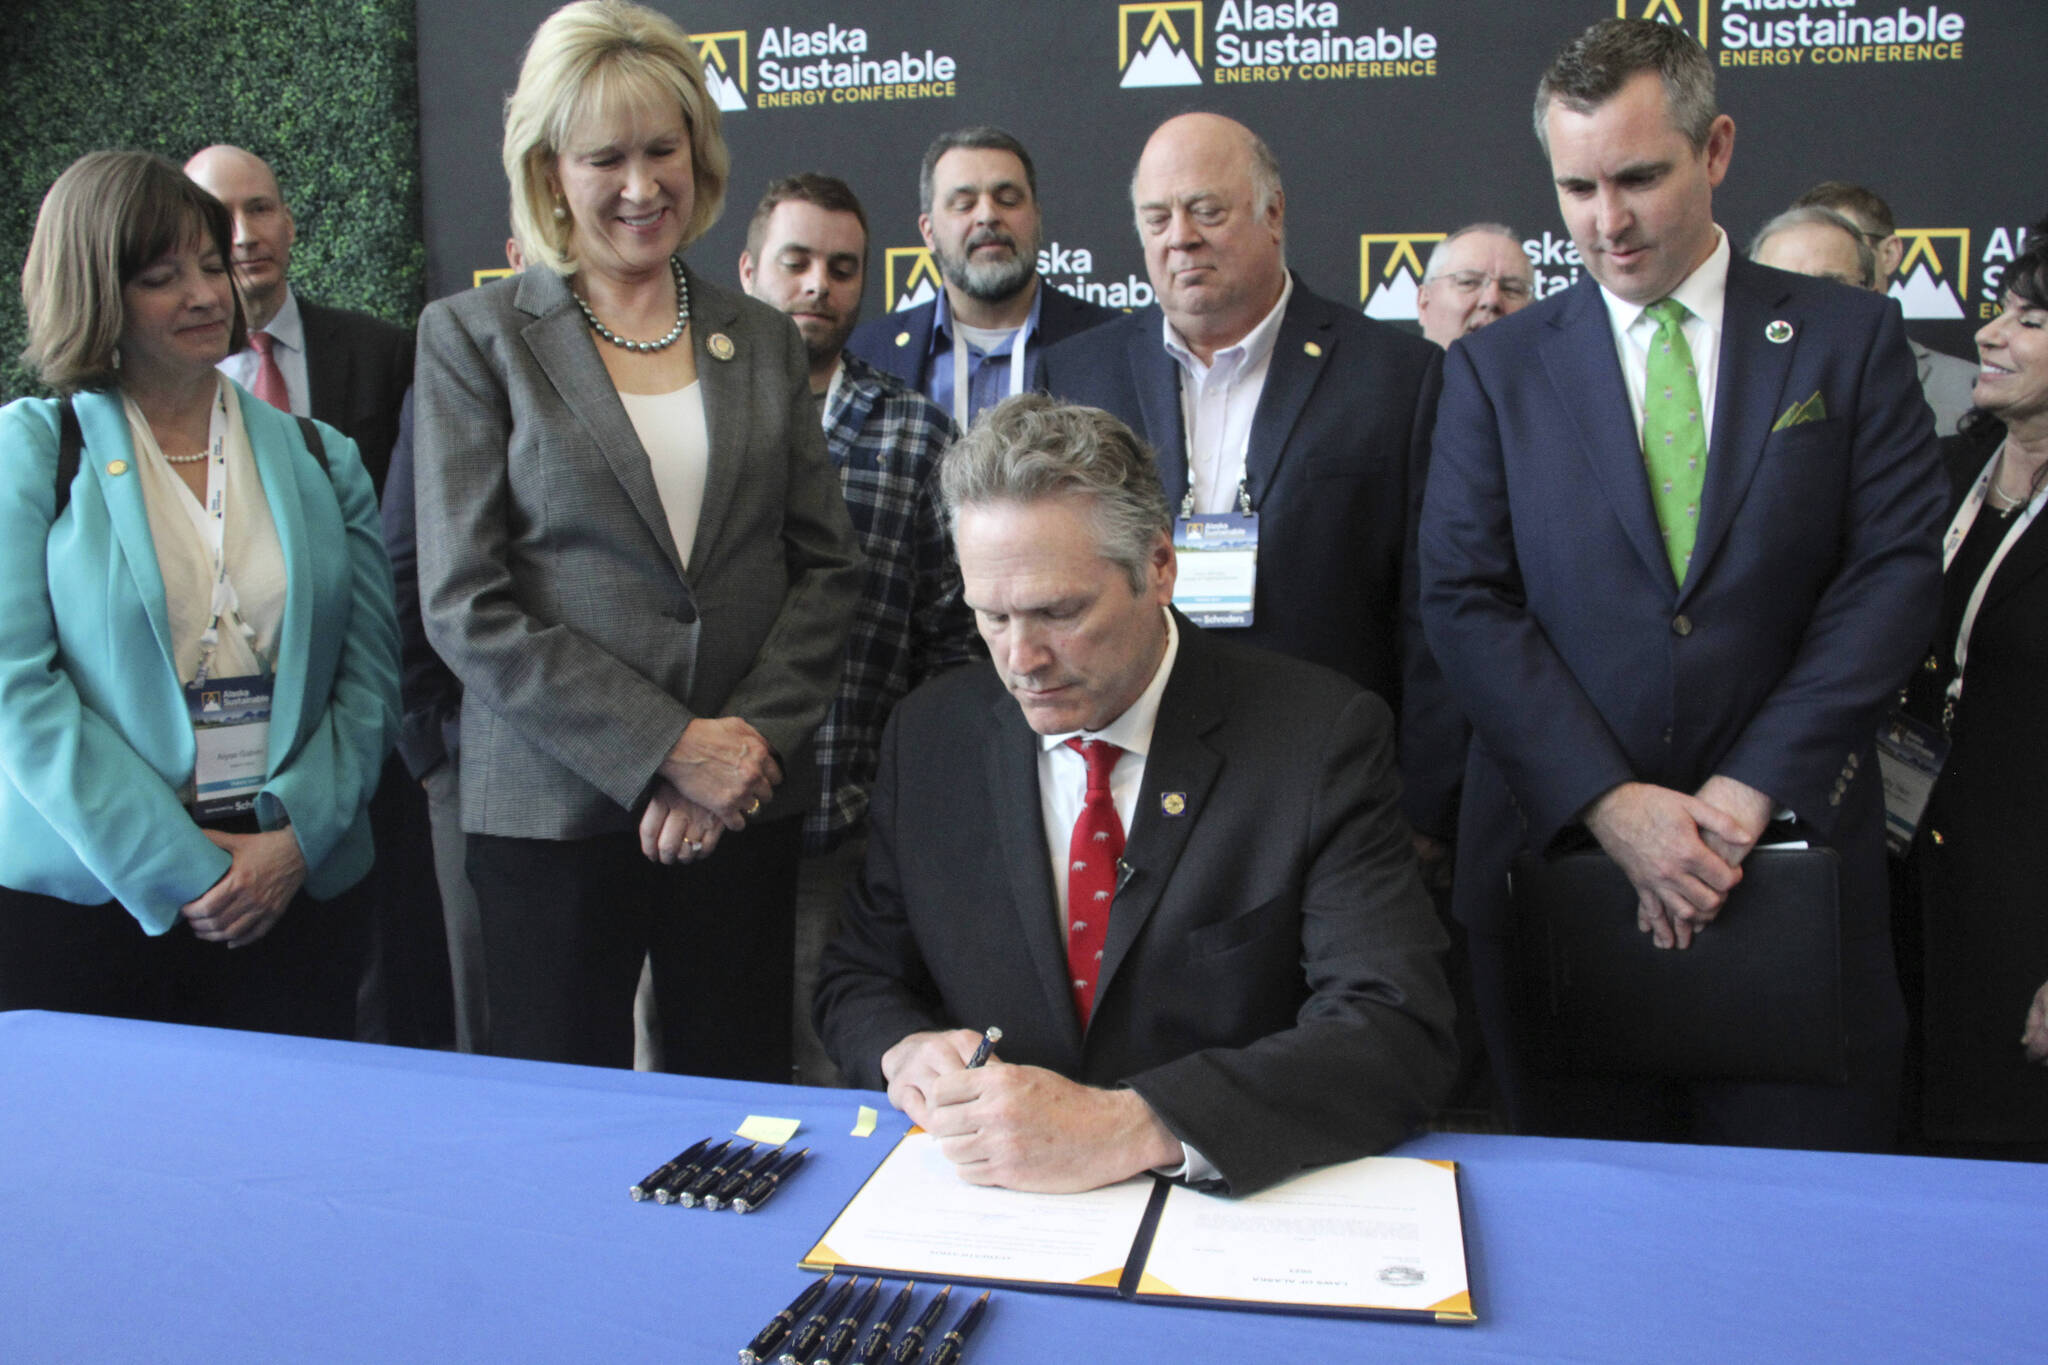 Gov. Mike Dunleavy signs legislation allowing the state to set up a carbon offset program Tuesday in Anchorage. Dunleavy signed the bill with Alaska lawmakers and administration officials standing behind him during the Alaska Sustainable Energy Conference at the Dena’ina Civic and Convention Center in downtown Anchorage. (AP Photo/Mark Thiessen)